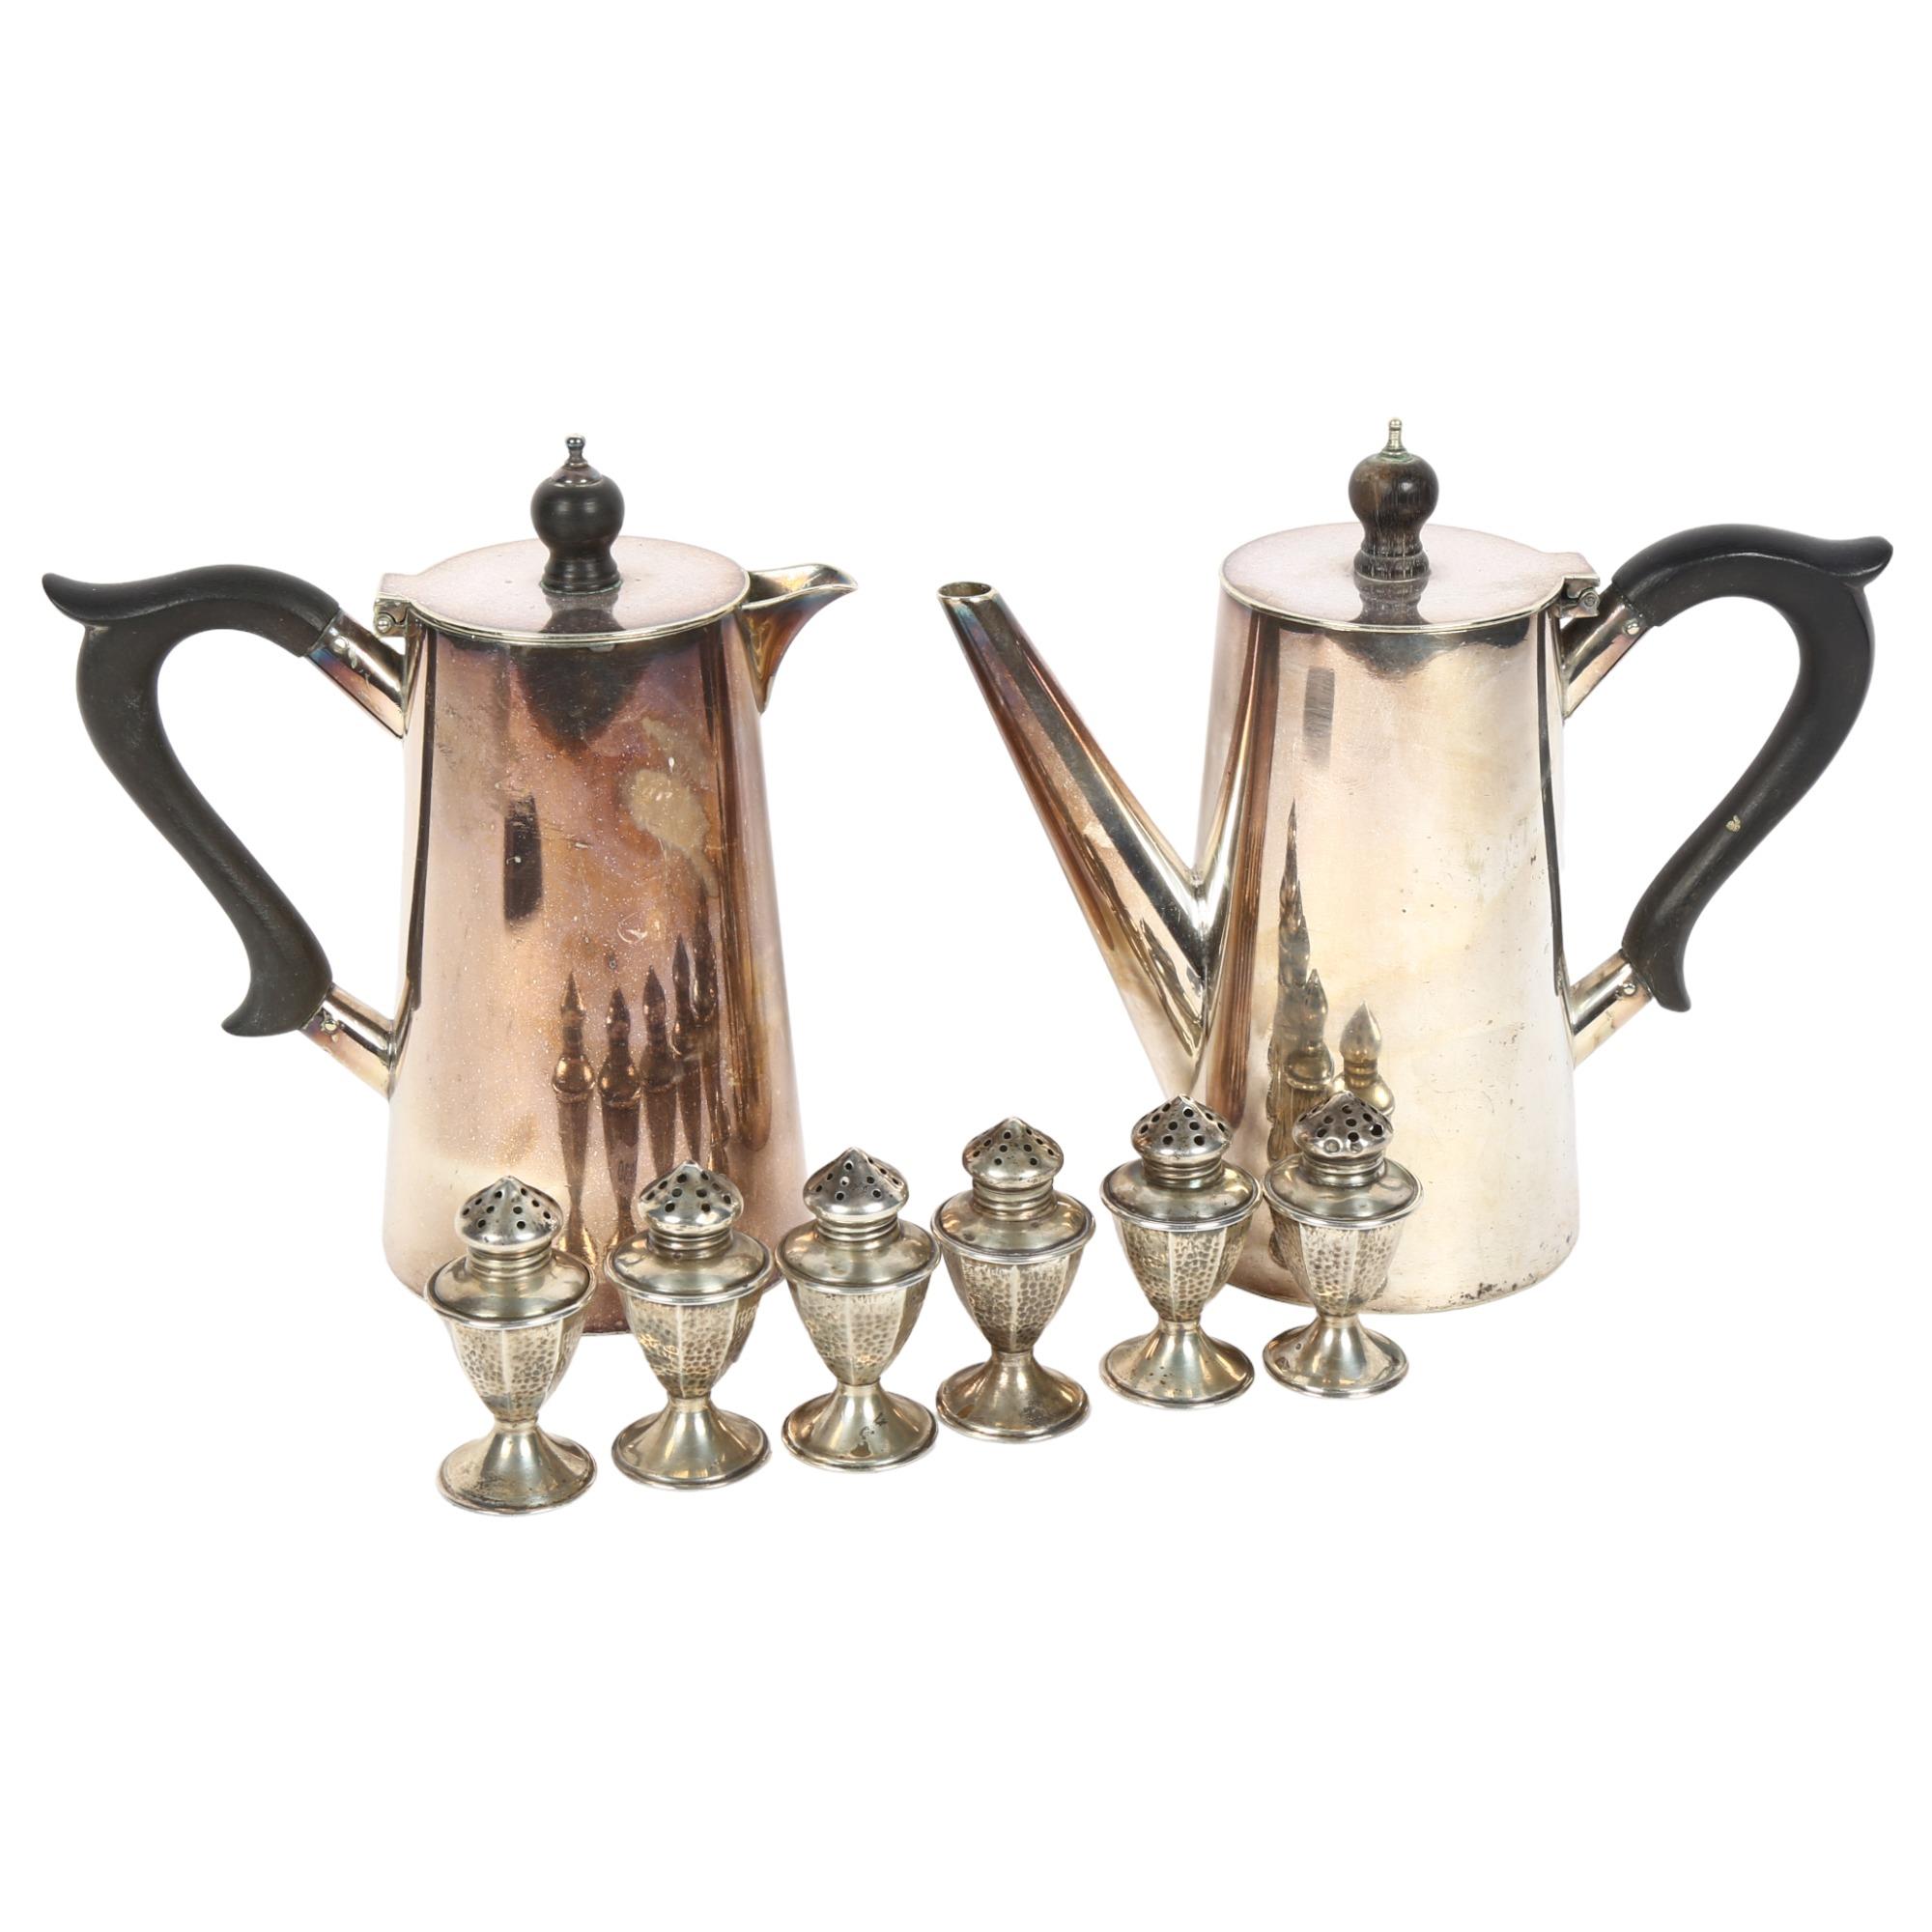 A pair of hotel plate hot water jugs, and a set of 6 hammered silver plated pepper pots